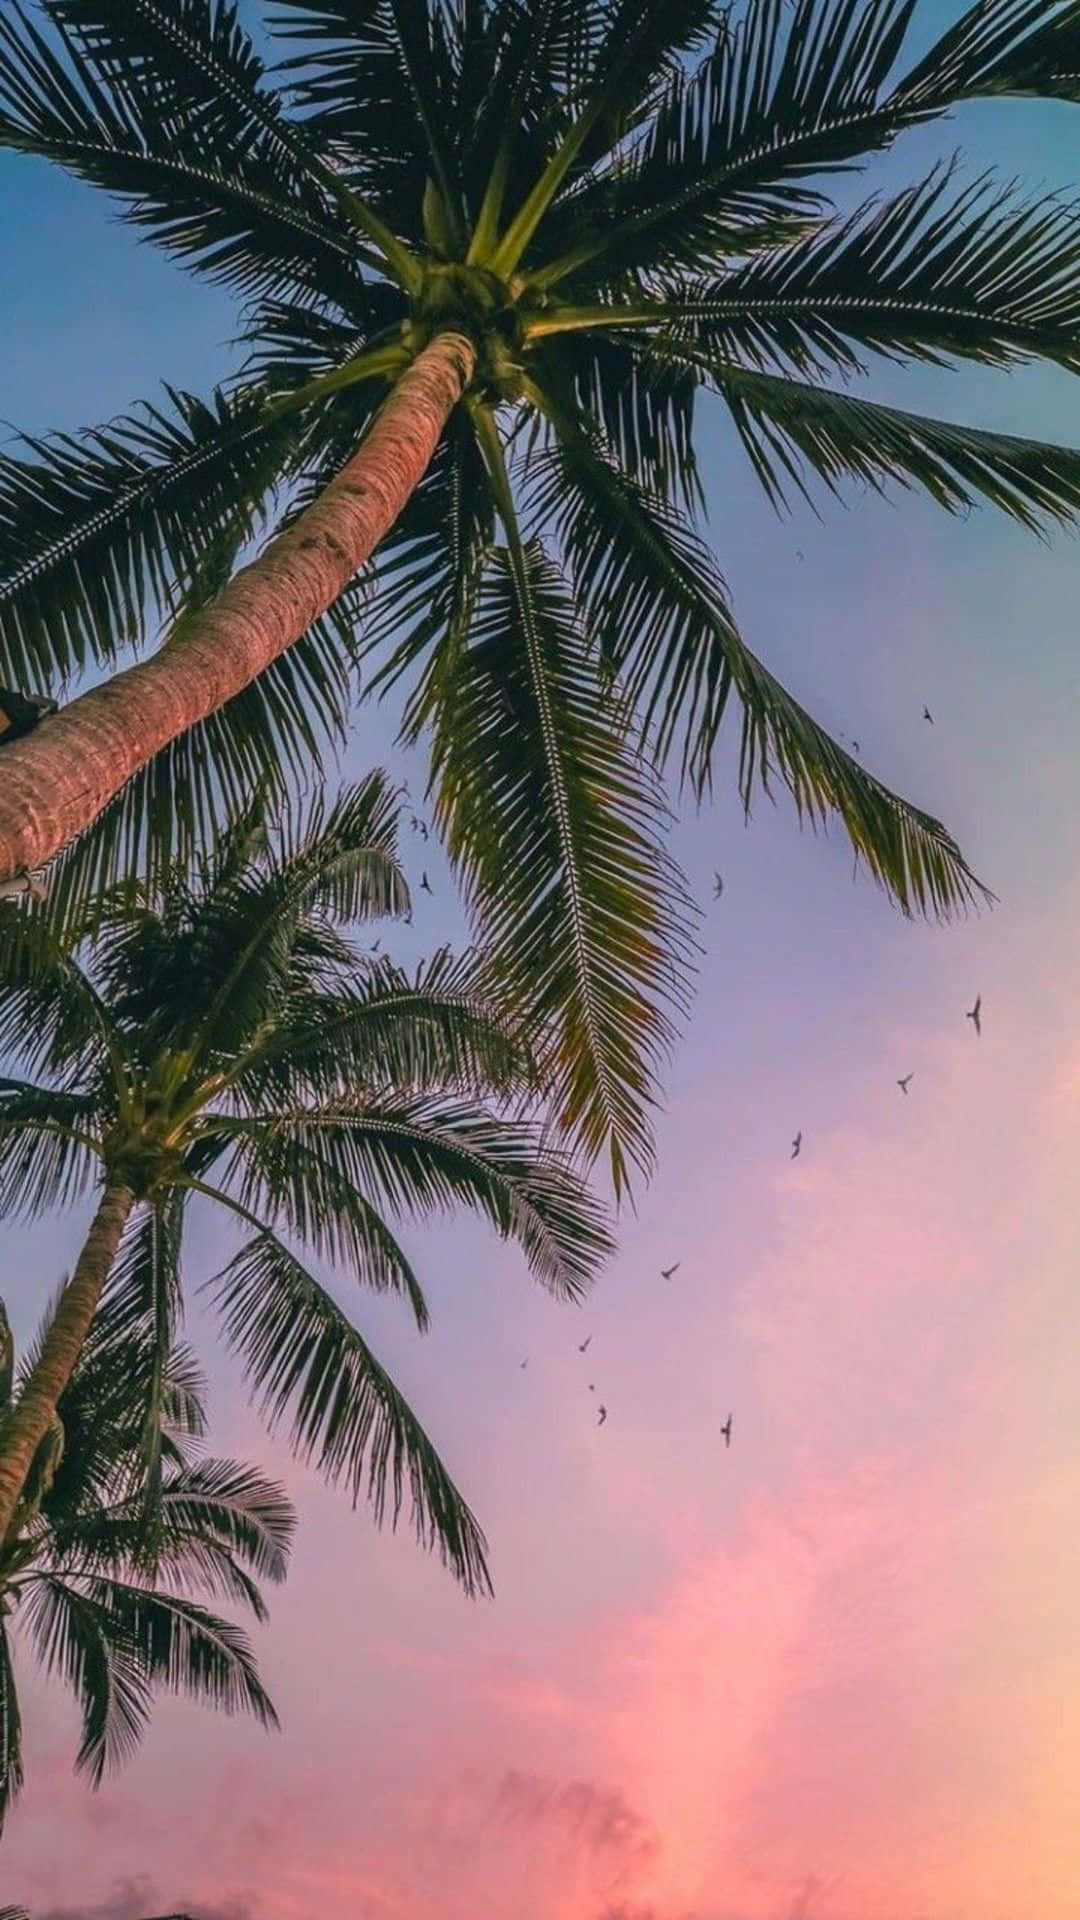 Unwind by the Palm Trees with your iPhone Wallpaper